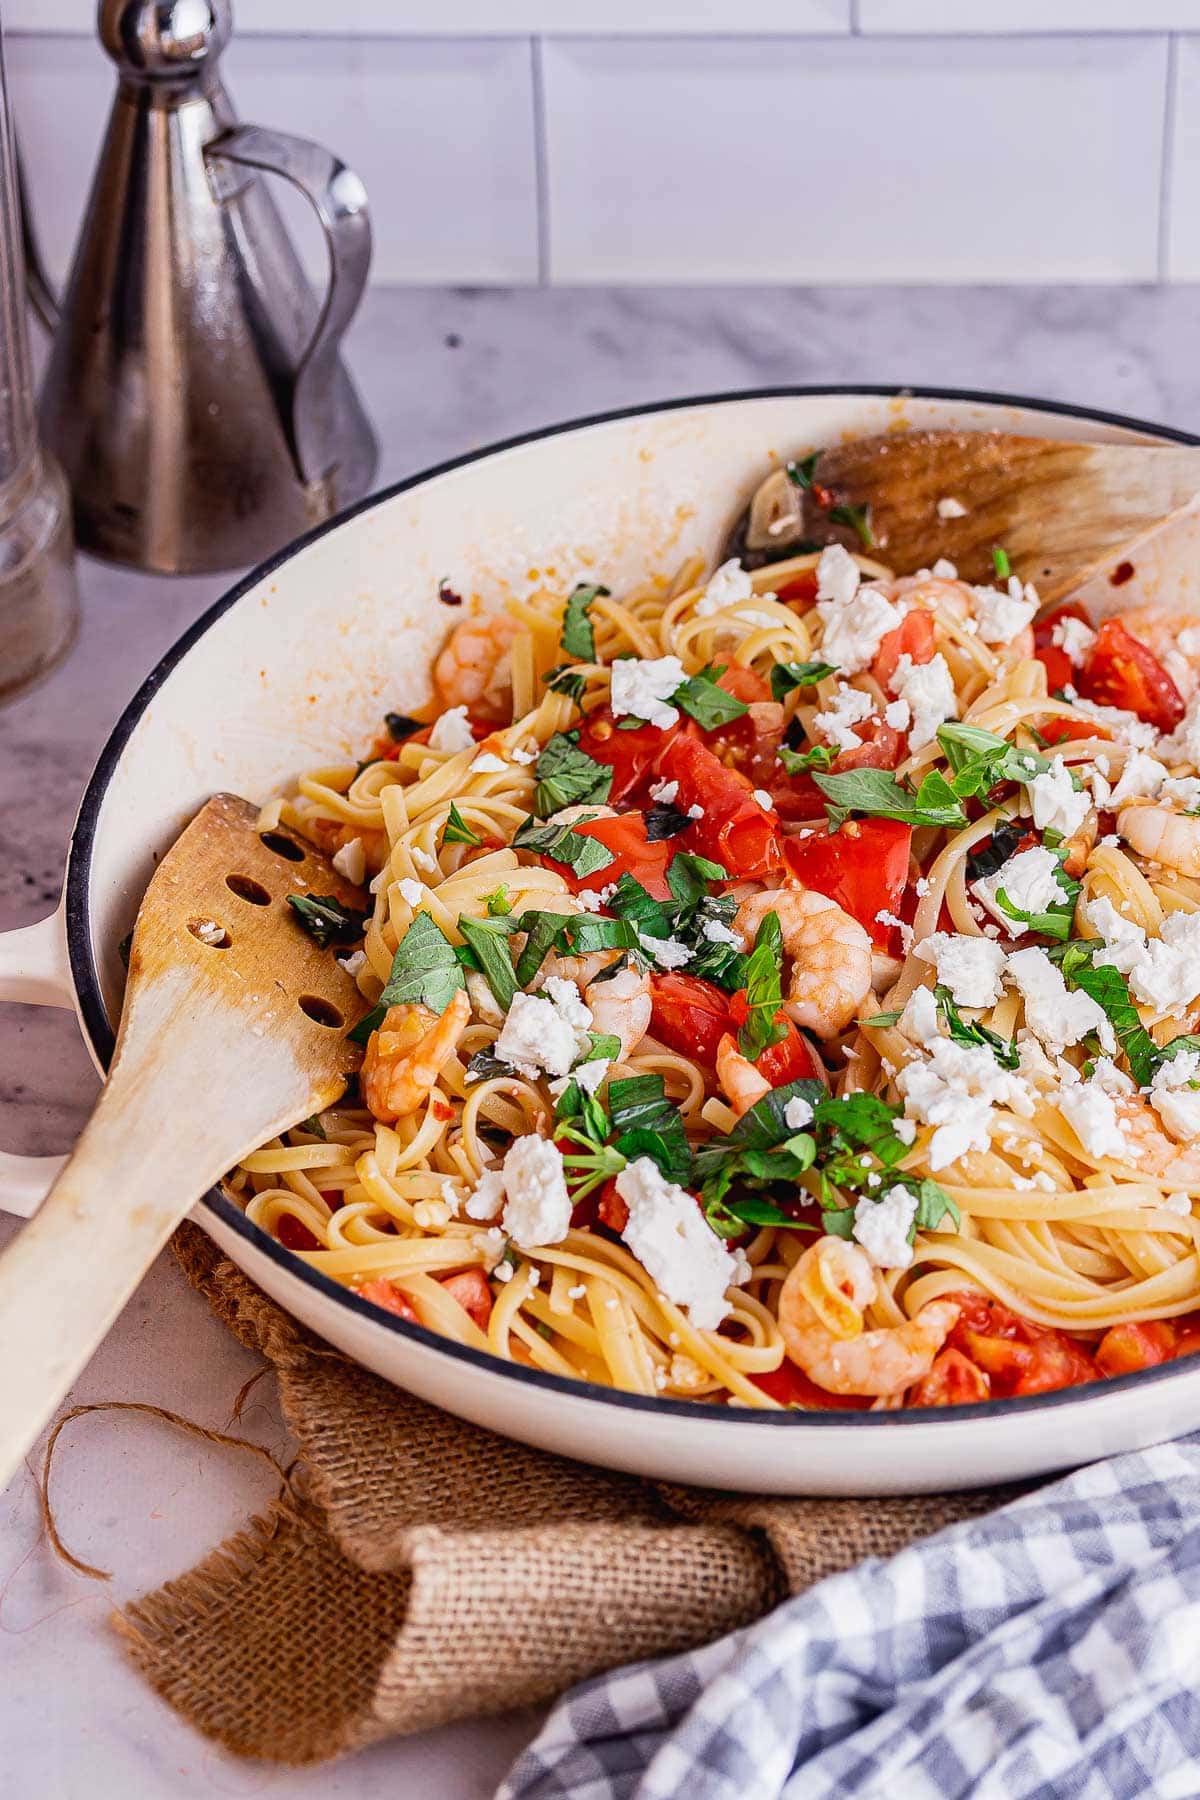 Dish of pasta with tomatoes and feta on a hessian mat